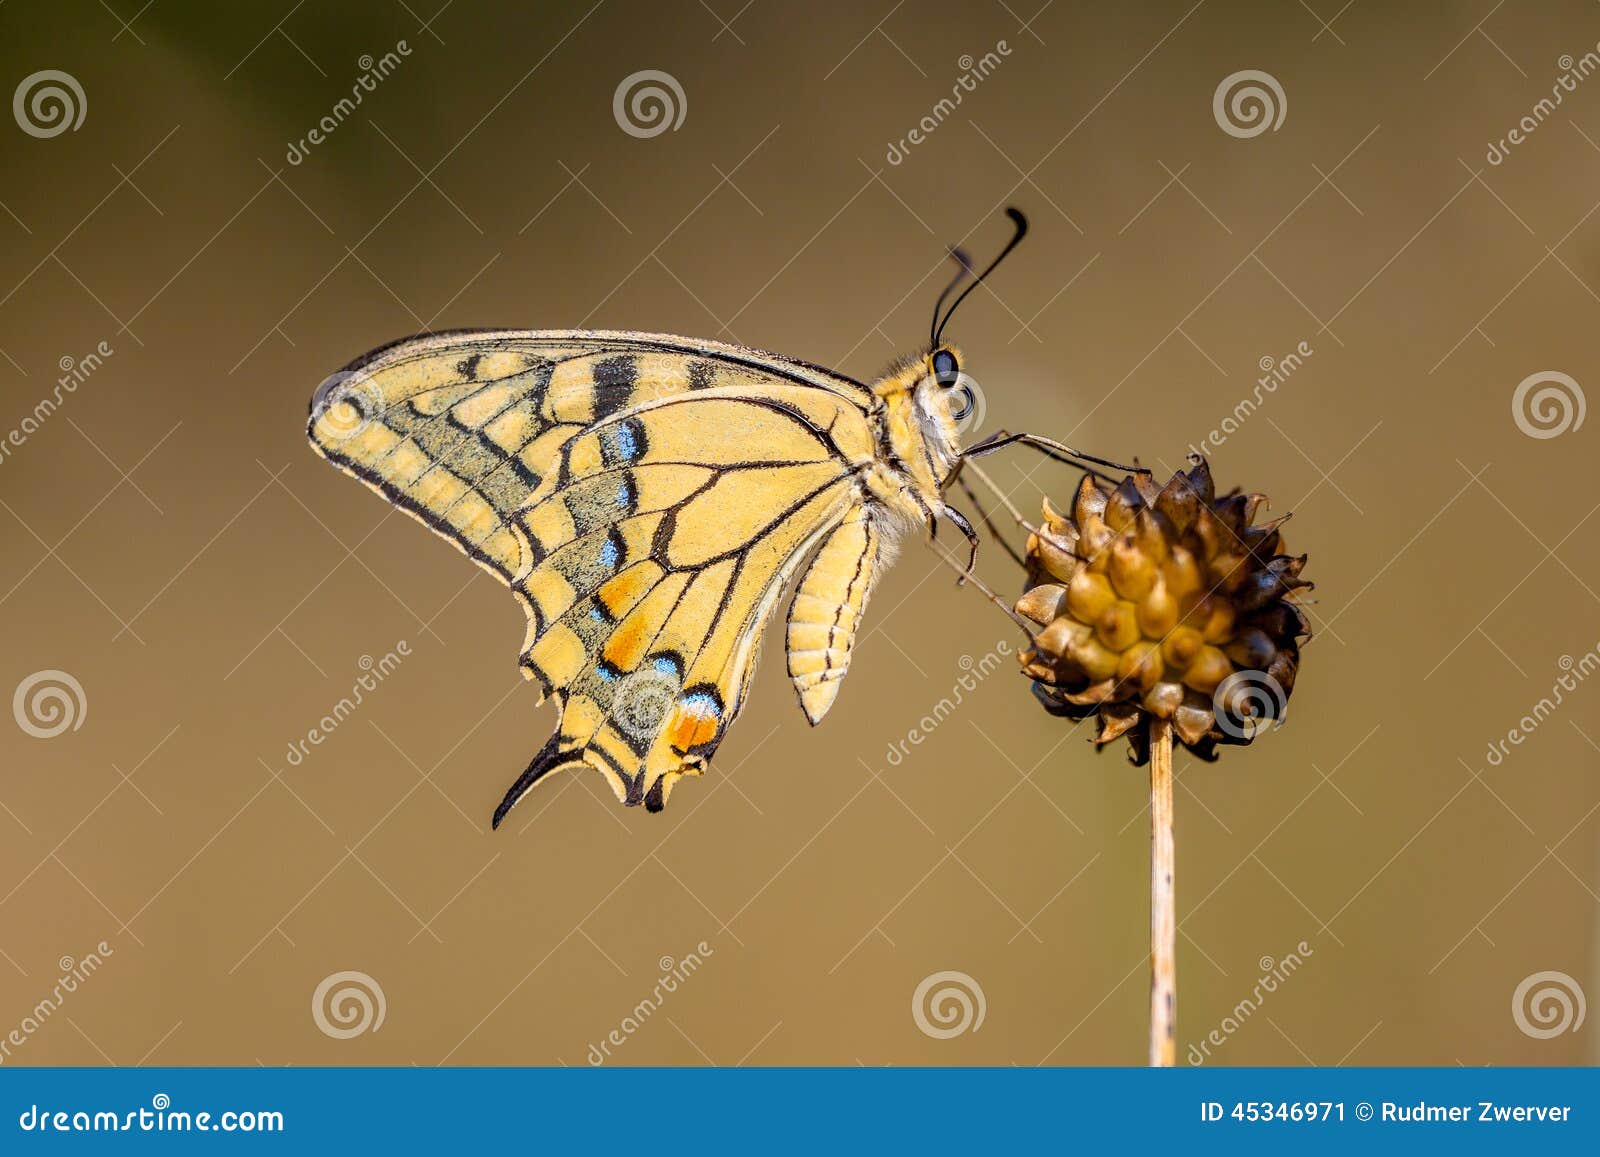 swallowtail (papilio machaon) resting on allium plant in the morning light